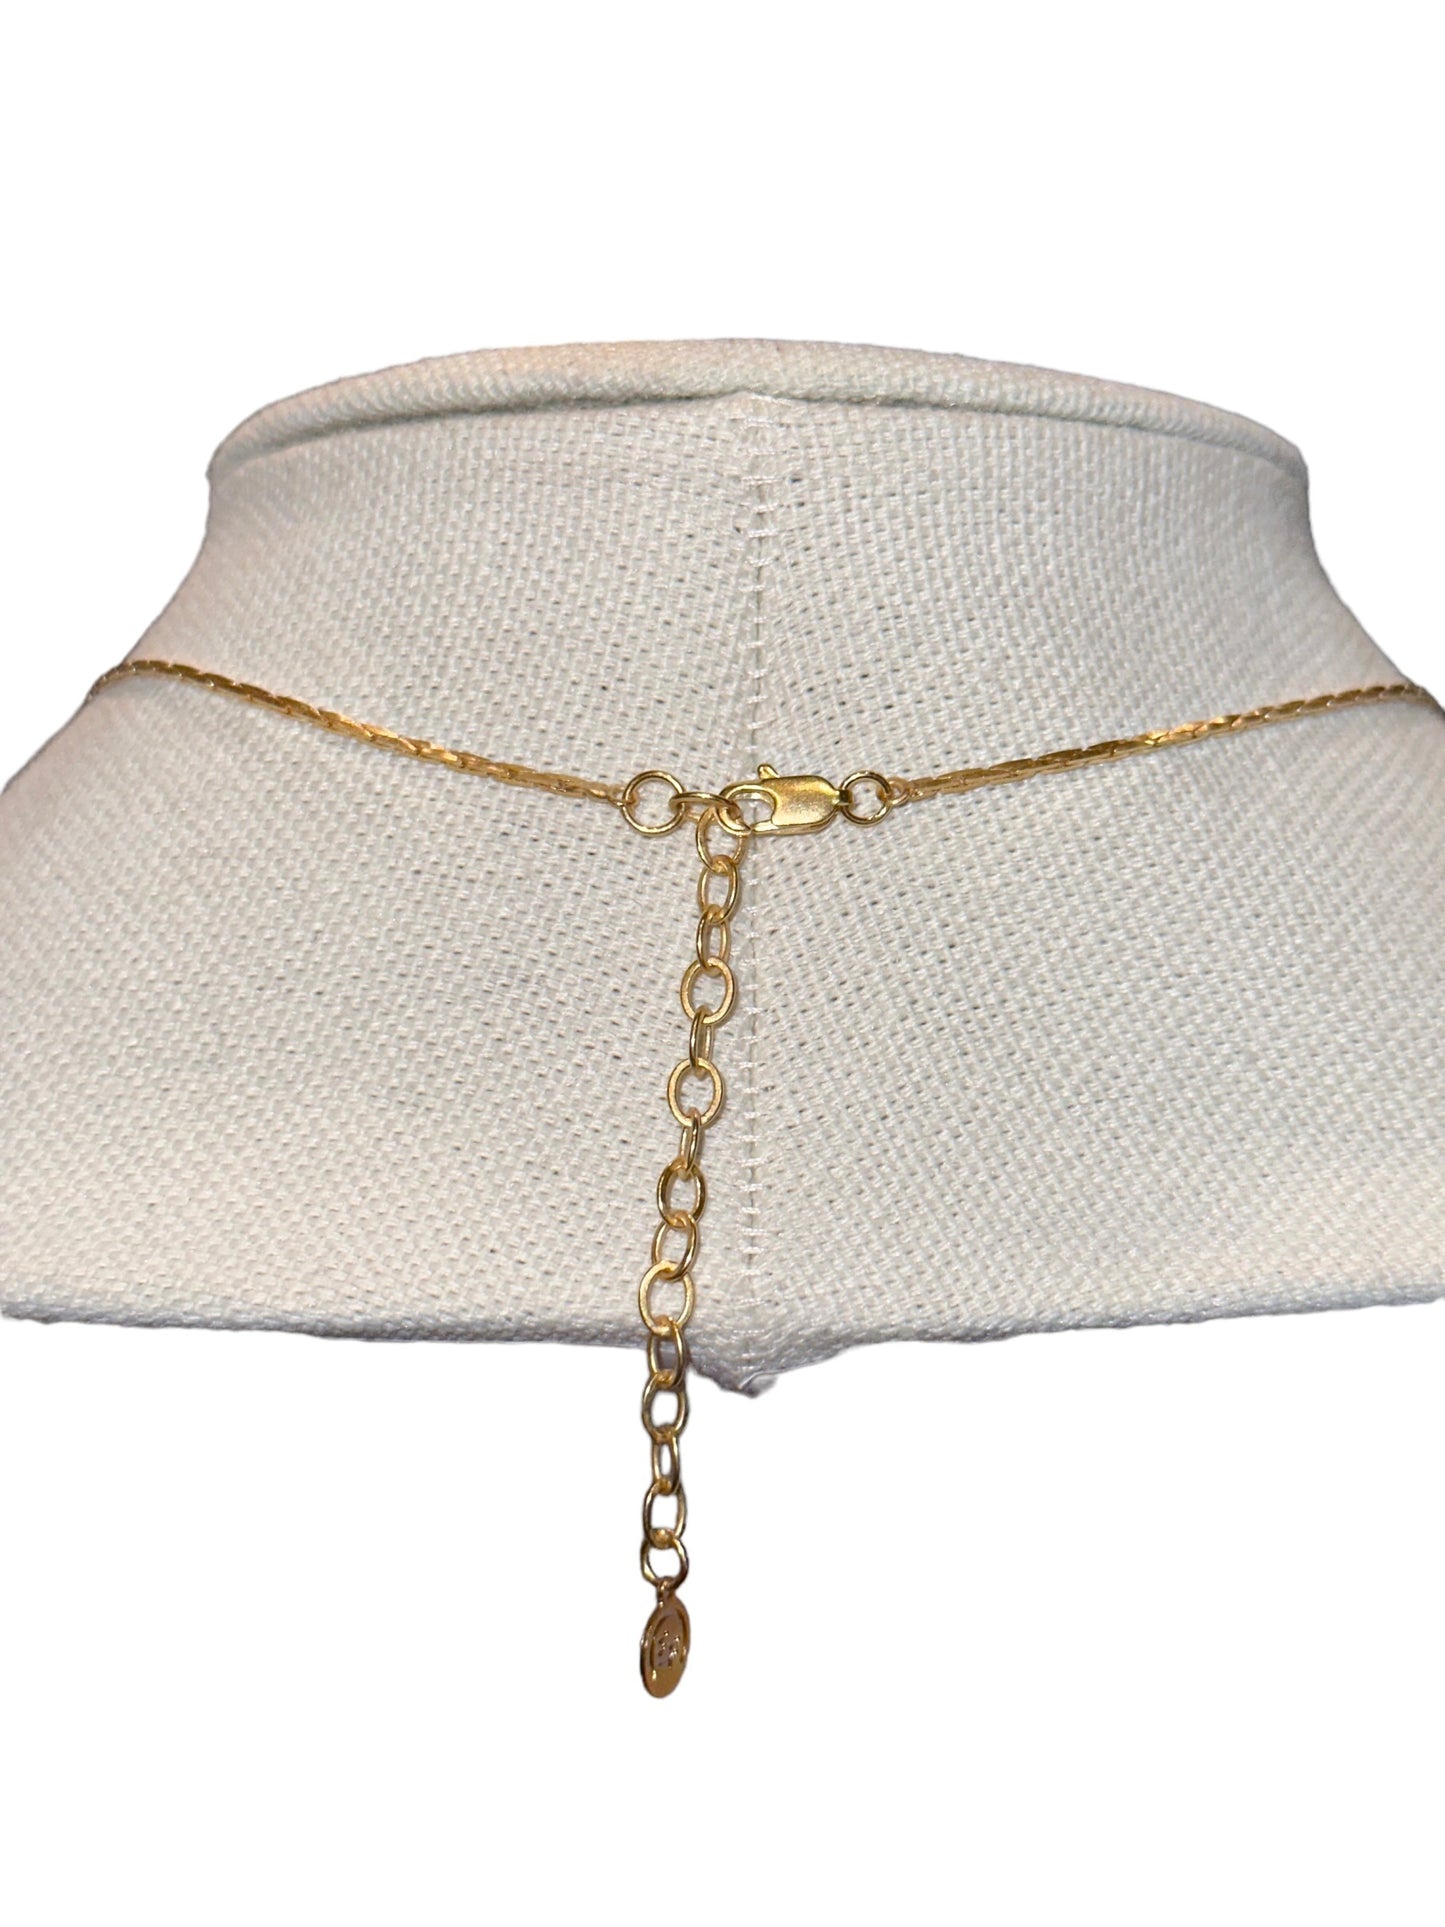 Dainty Snake Chain Dangle Necklace in gold by Eneida Franca